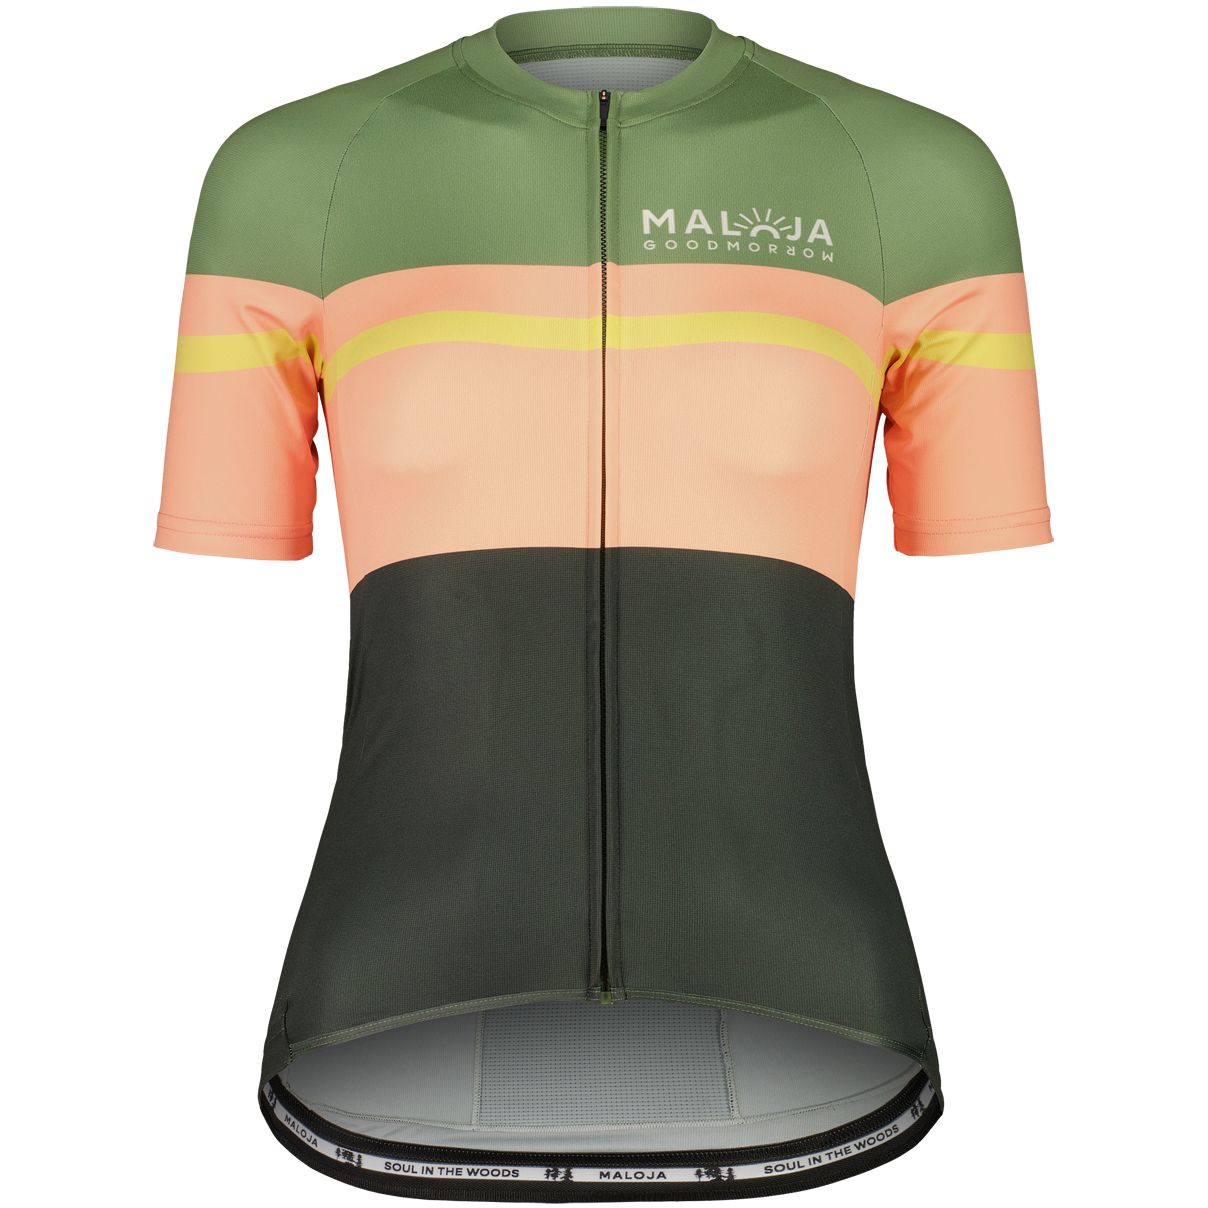 Picture of Maloja MadrisaM. Cycle Jersey Women - deep forest 0550